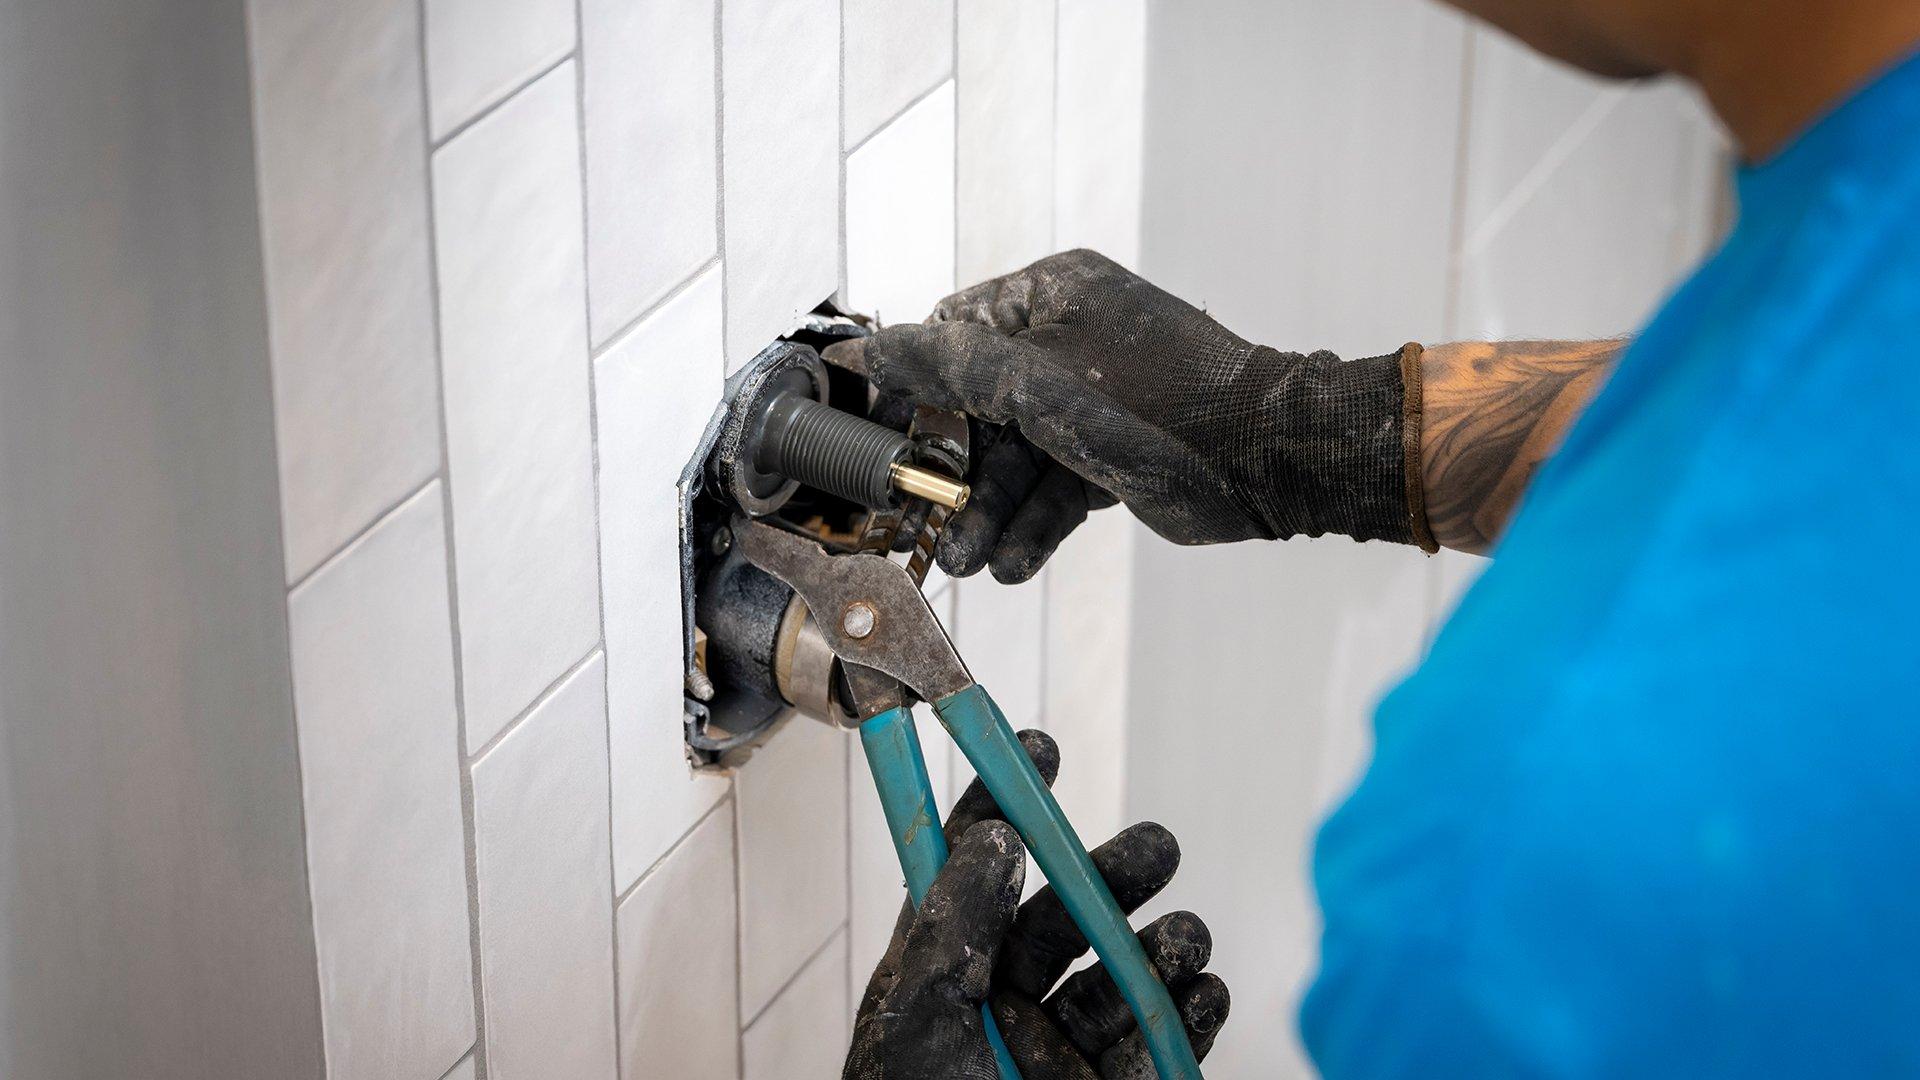 In a residential bathroom, a plumber prepares shower pipes for a new installation.